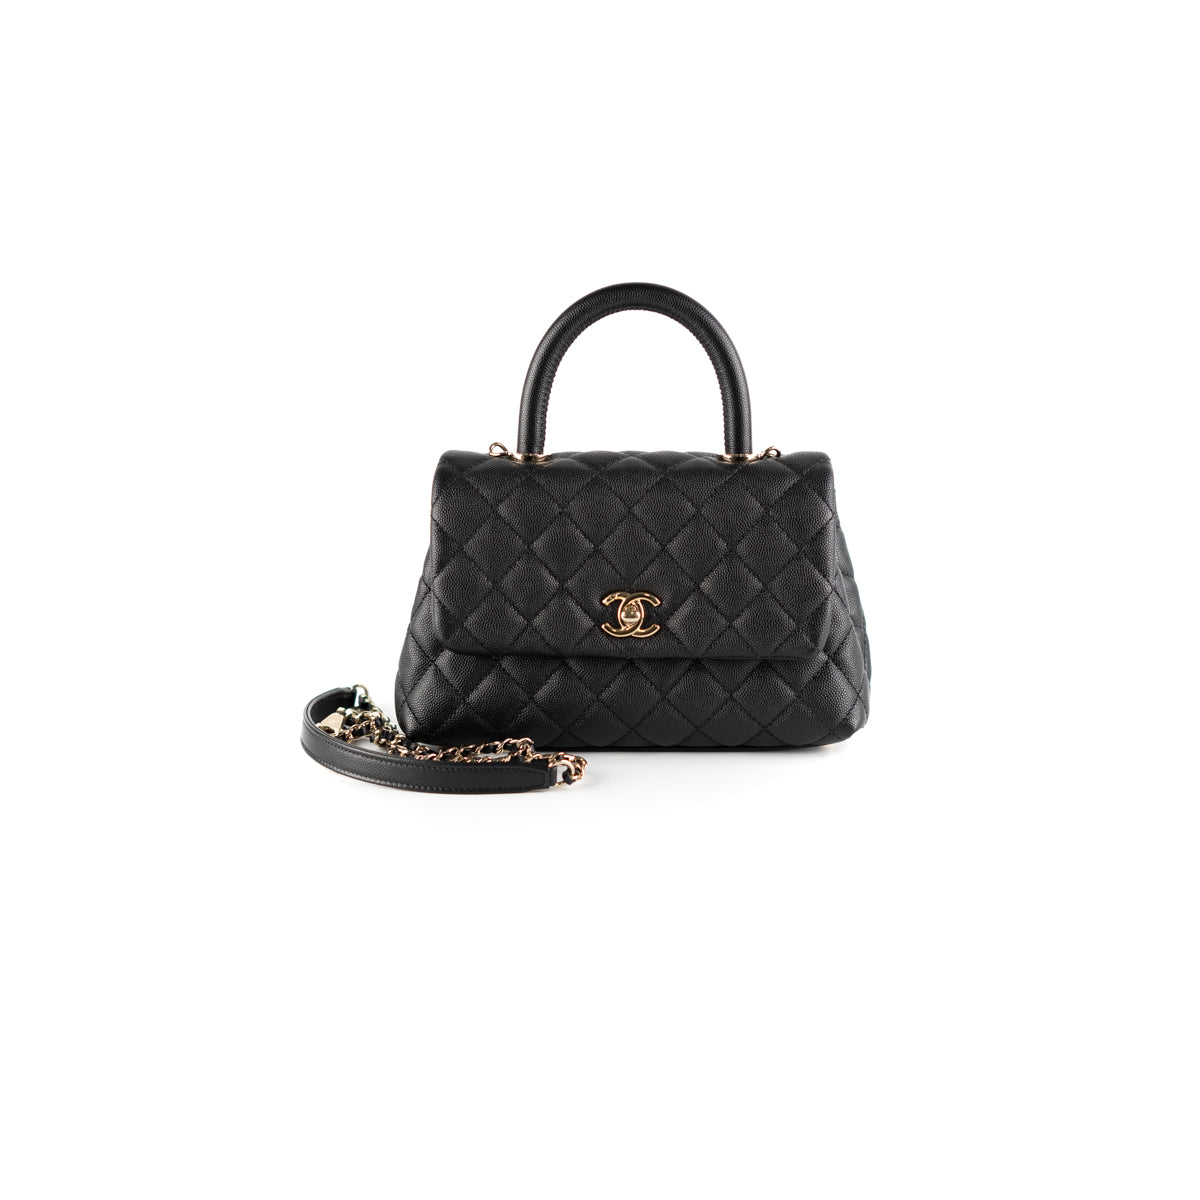 SOLD Chanel Coco Lizard Handle with RHW in Medium size 105  Reetzy